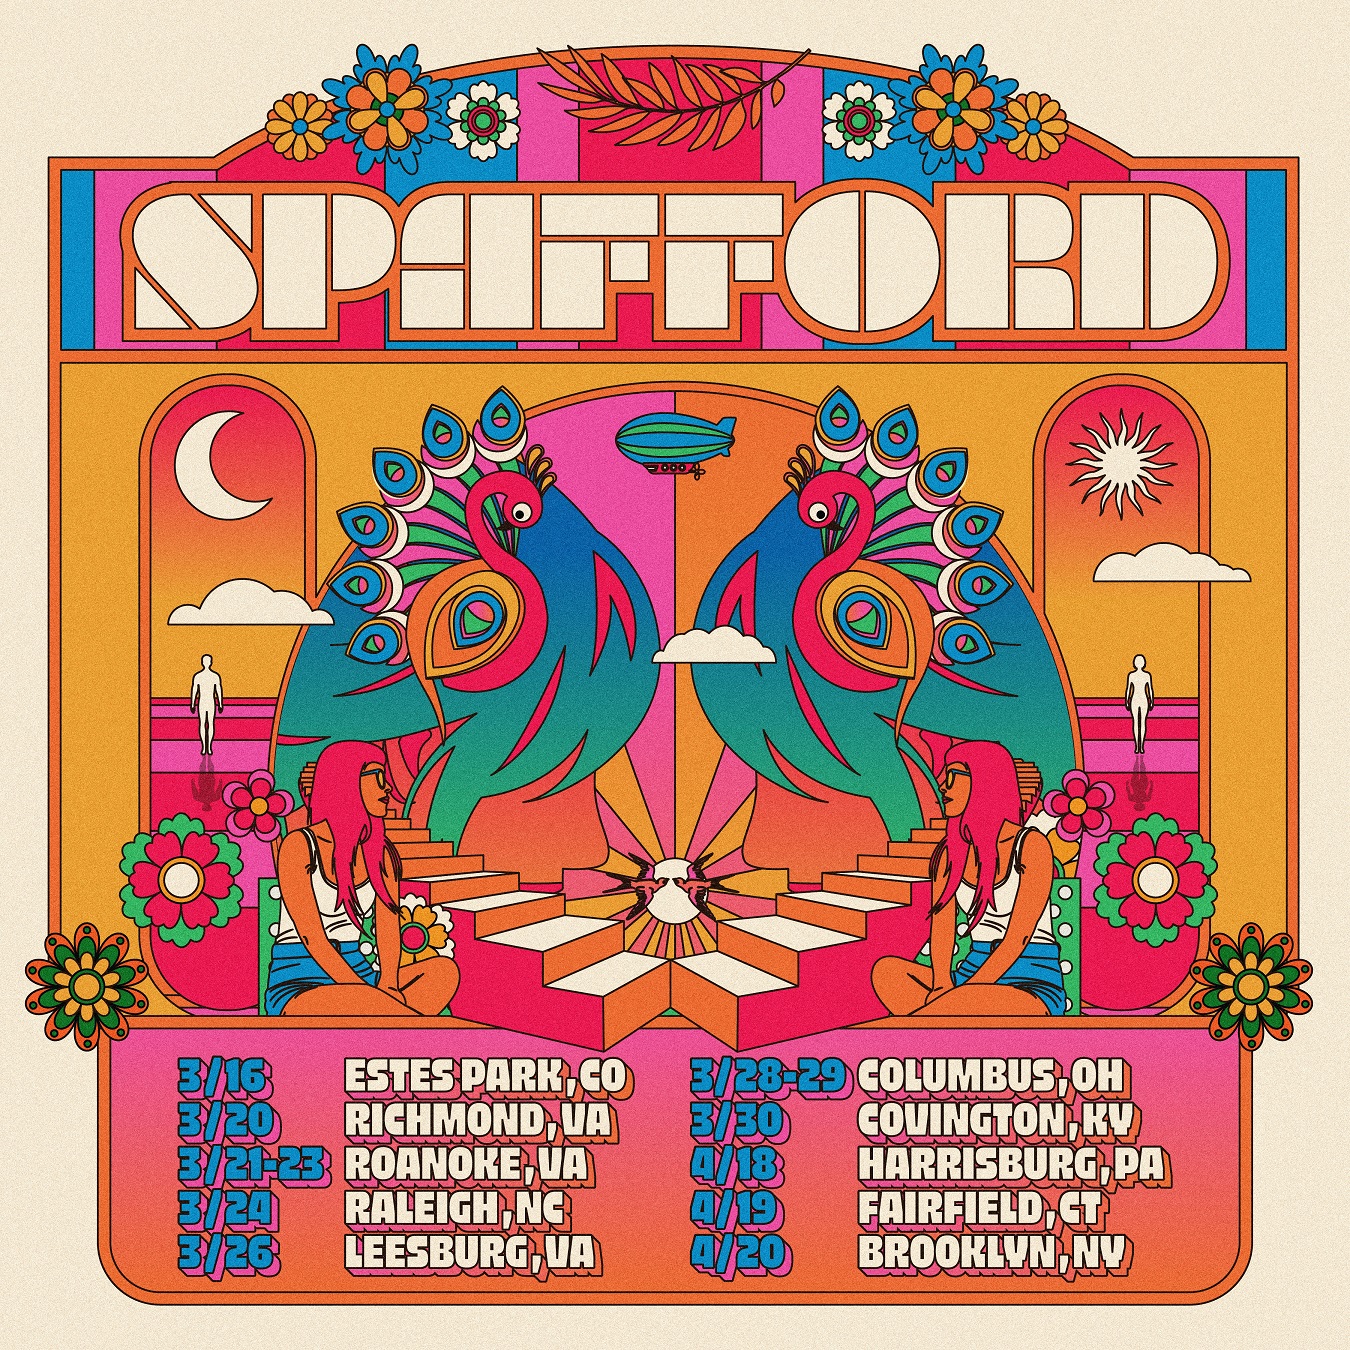 Spafford Announces Spring Tour with Plenty of East Coast Love